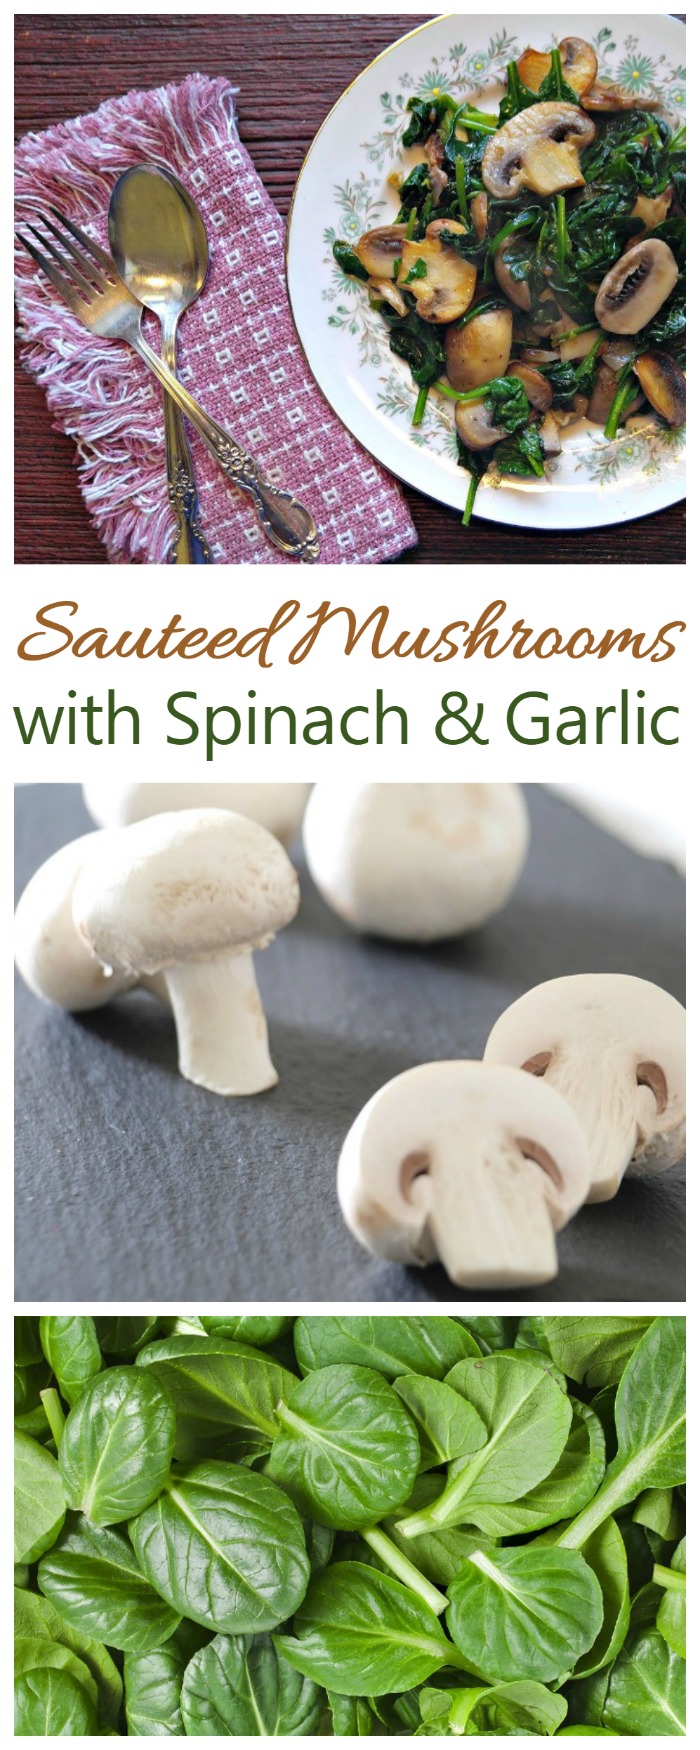 These sauteed mushrooms are easy to make with just a few ingredients. Serve them for breakfast, lunch or dinner!